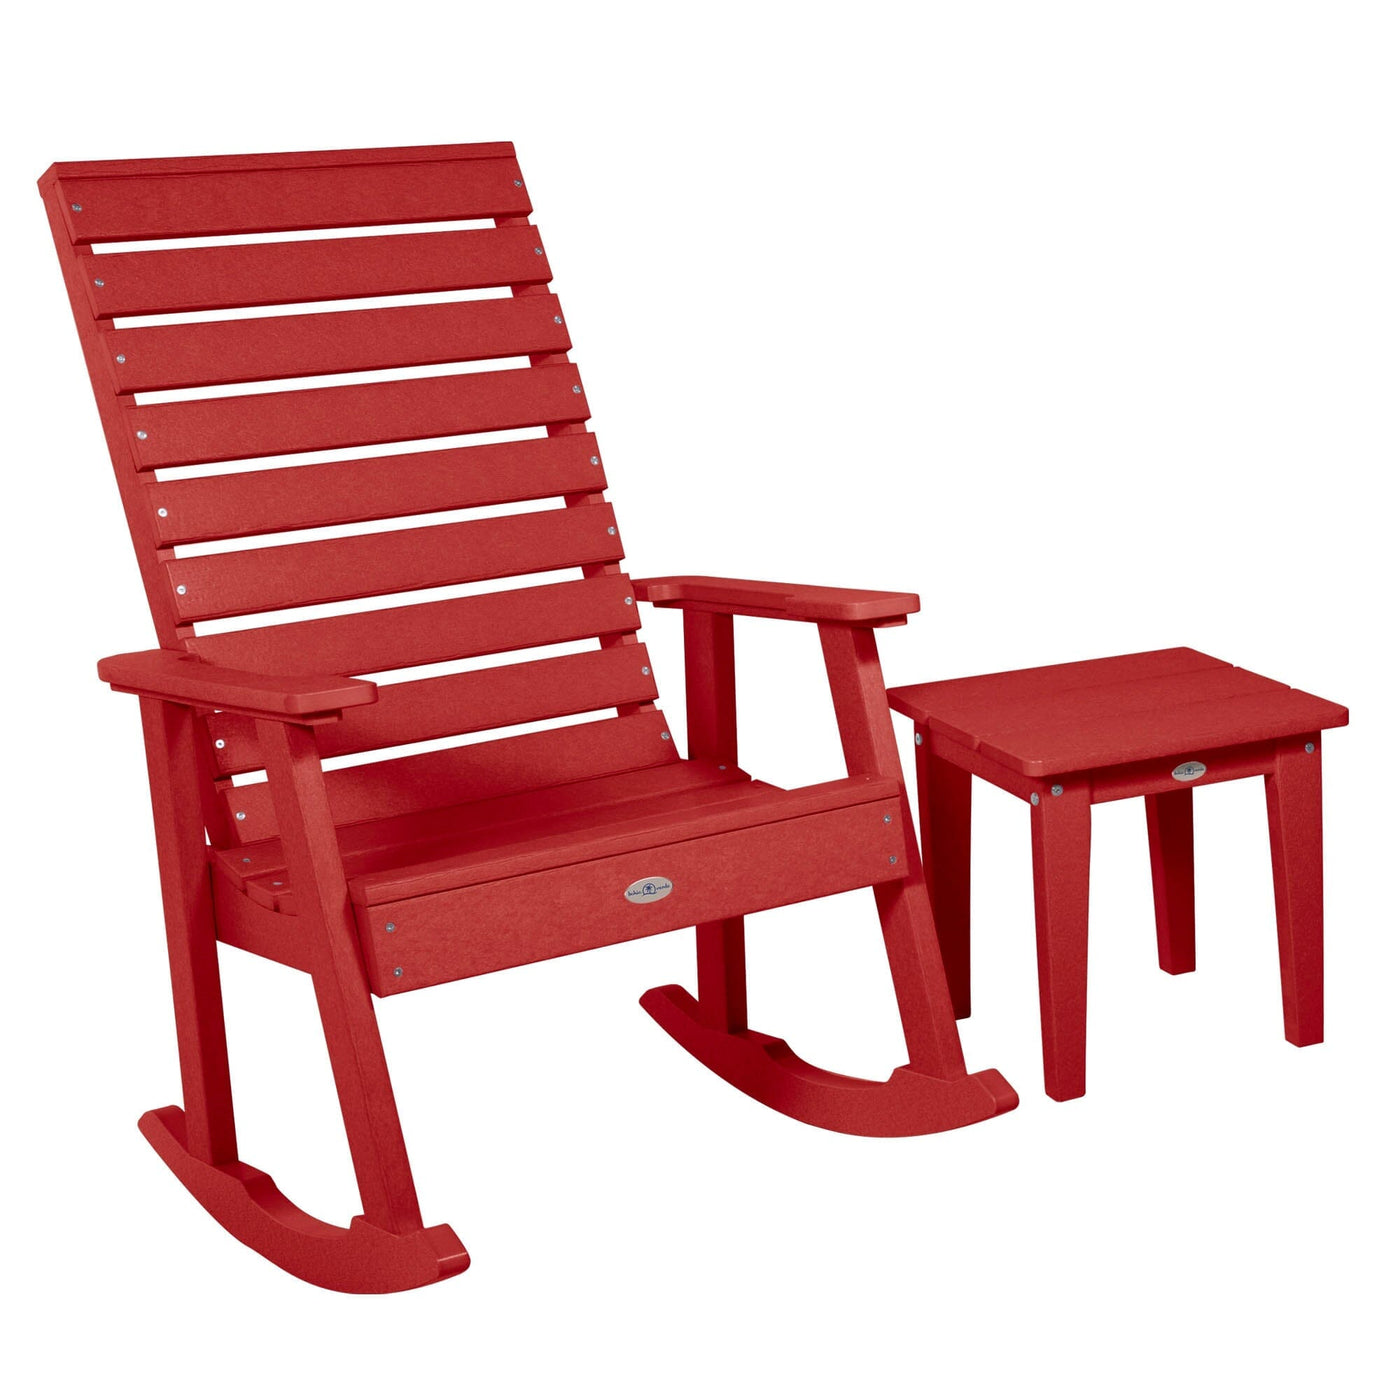 Riverside Rocking Chair and Side Table 2pc Set Kitted Set Bahia Verde Outdoors Boathouse Red 